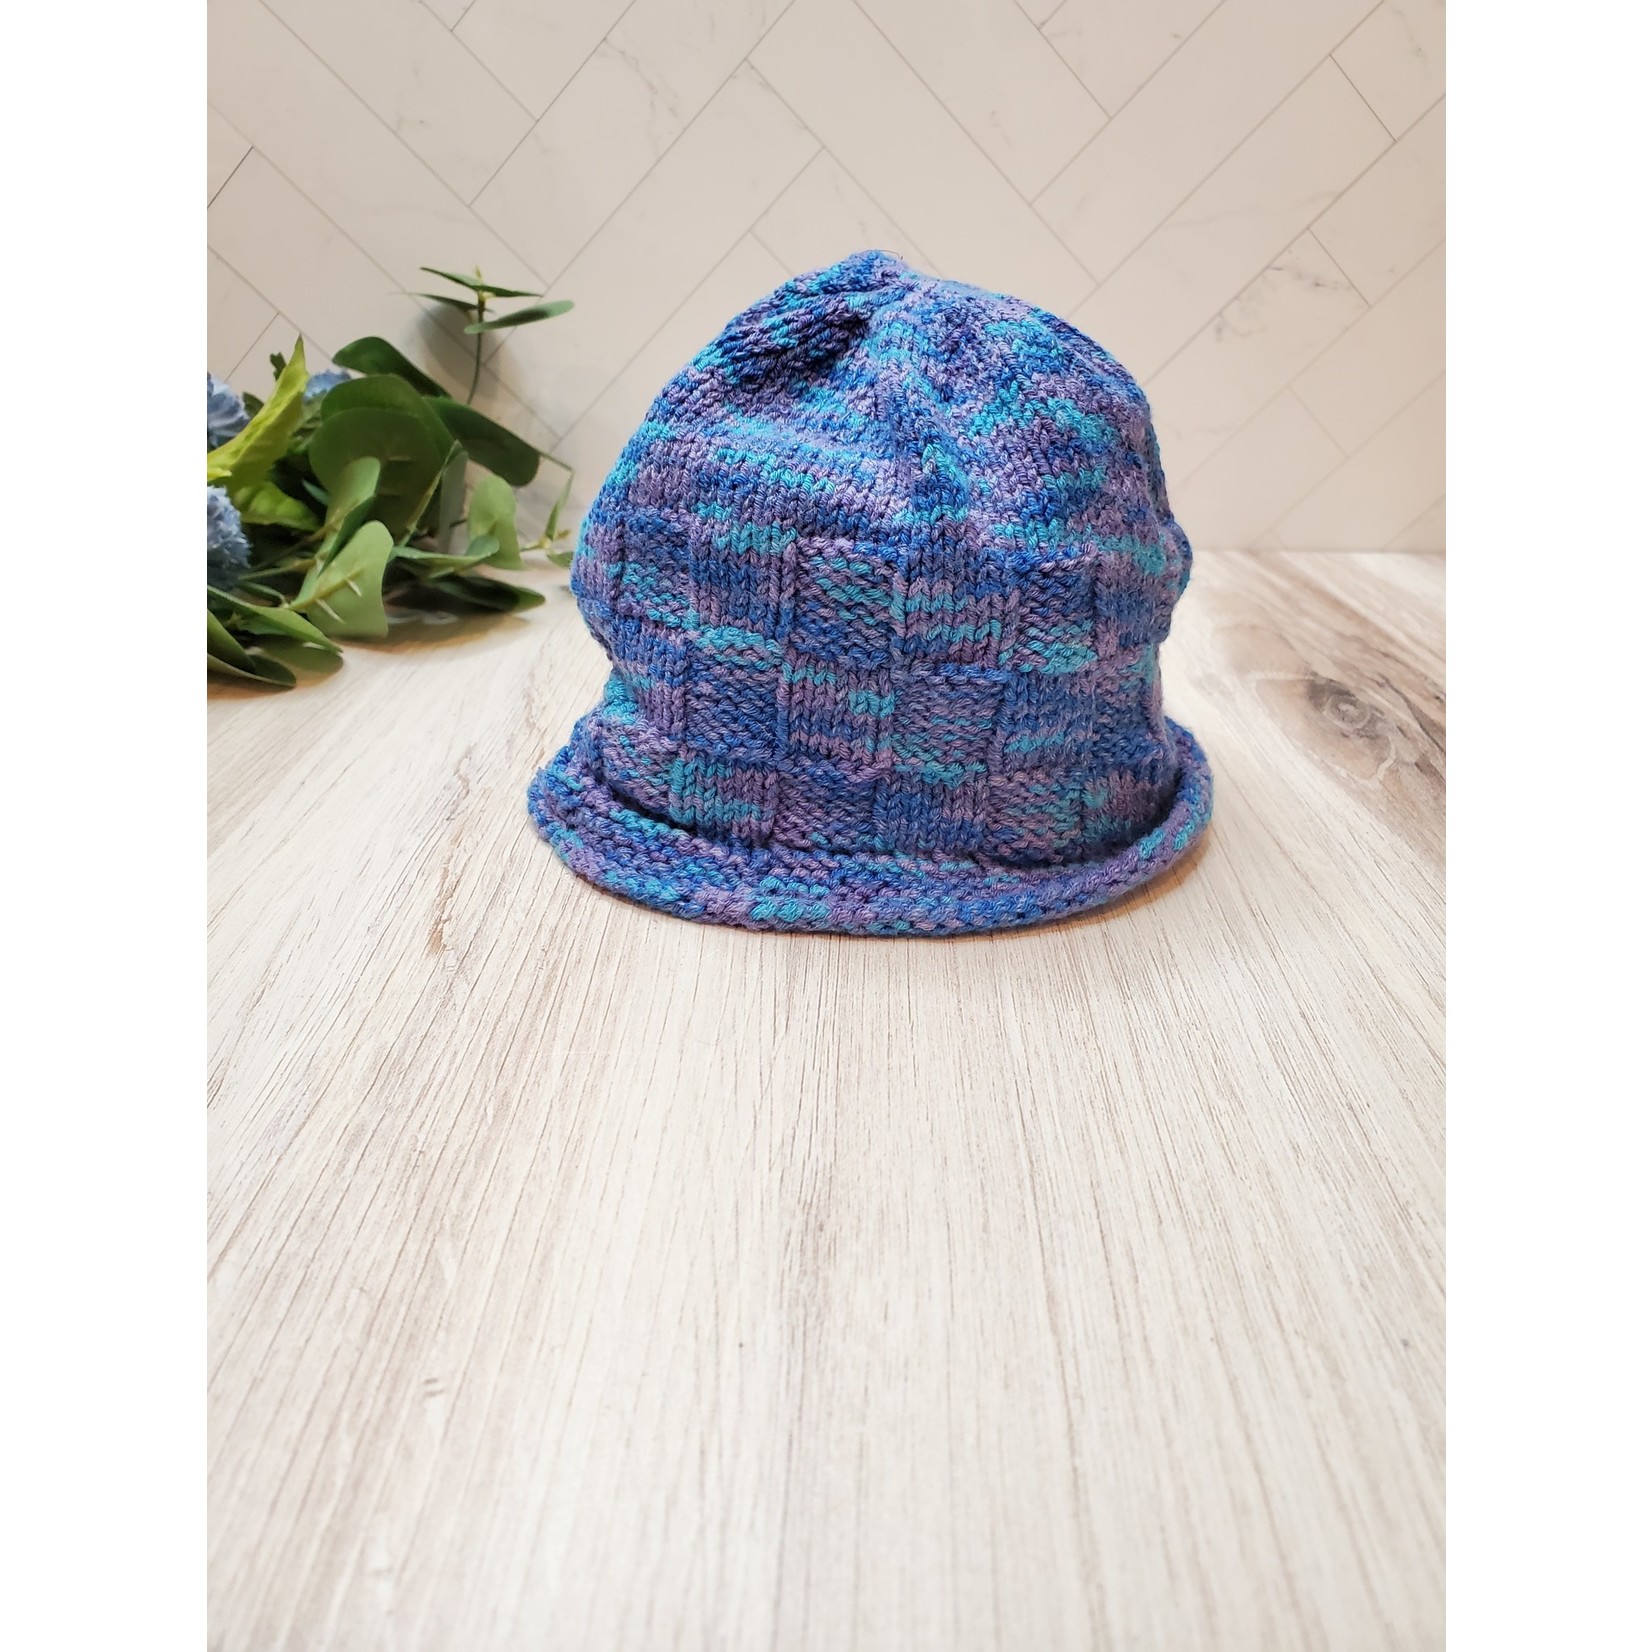 Roan's Repertoire Baby Hat - Knitted - Blue & Purple